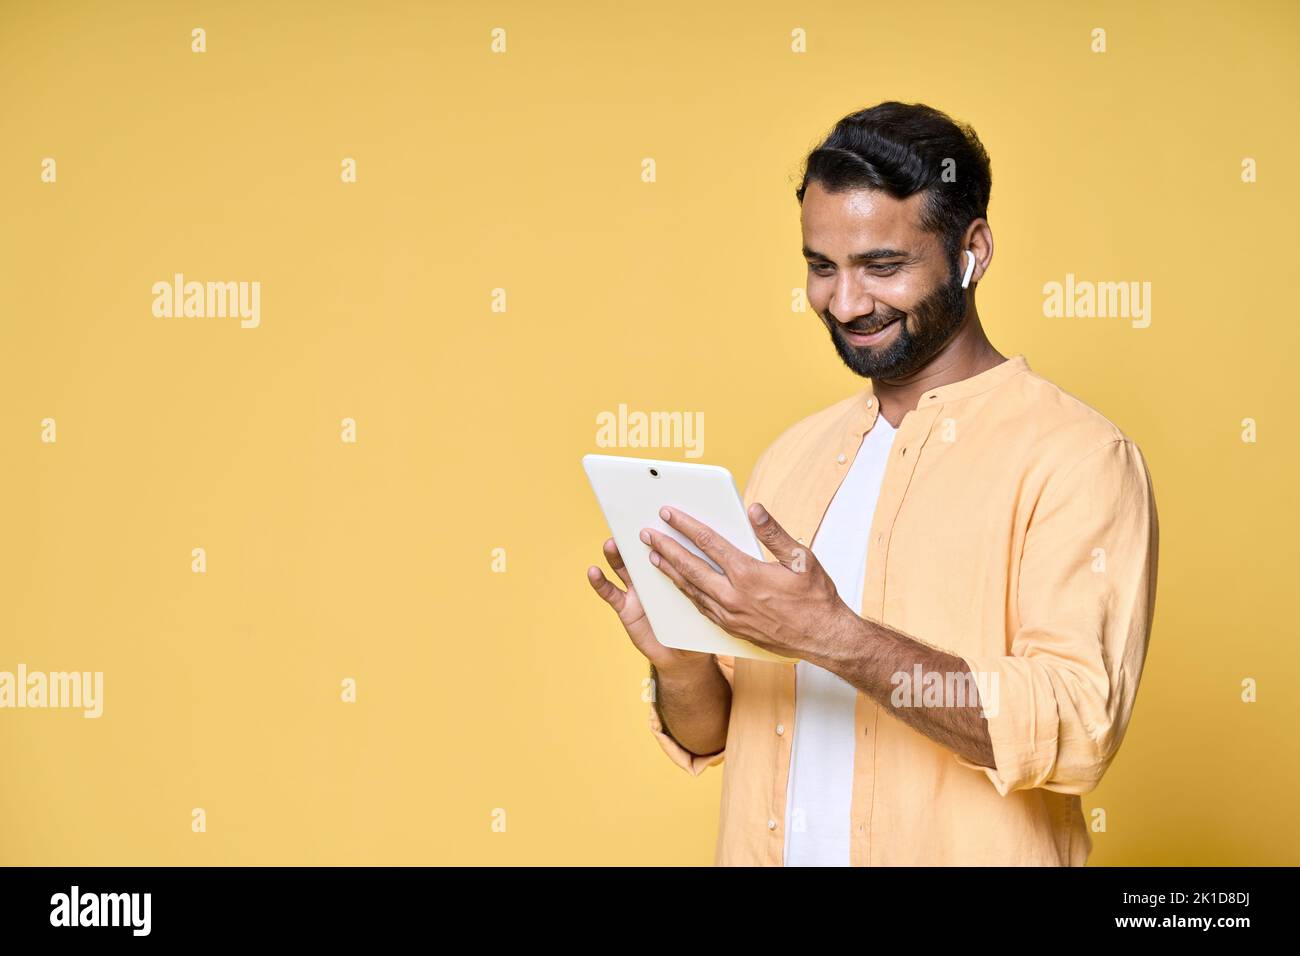 Happy indian man using digital tablet isolated on yellow background. Stock Photo